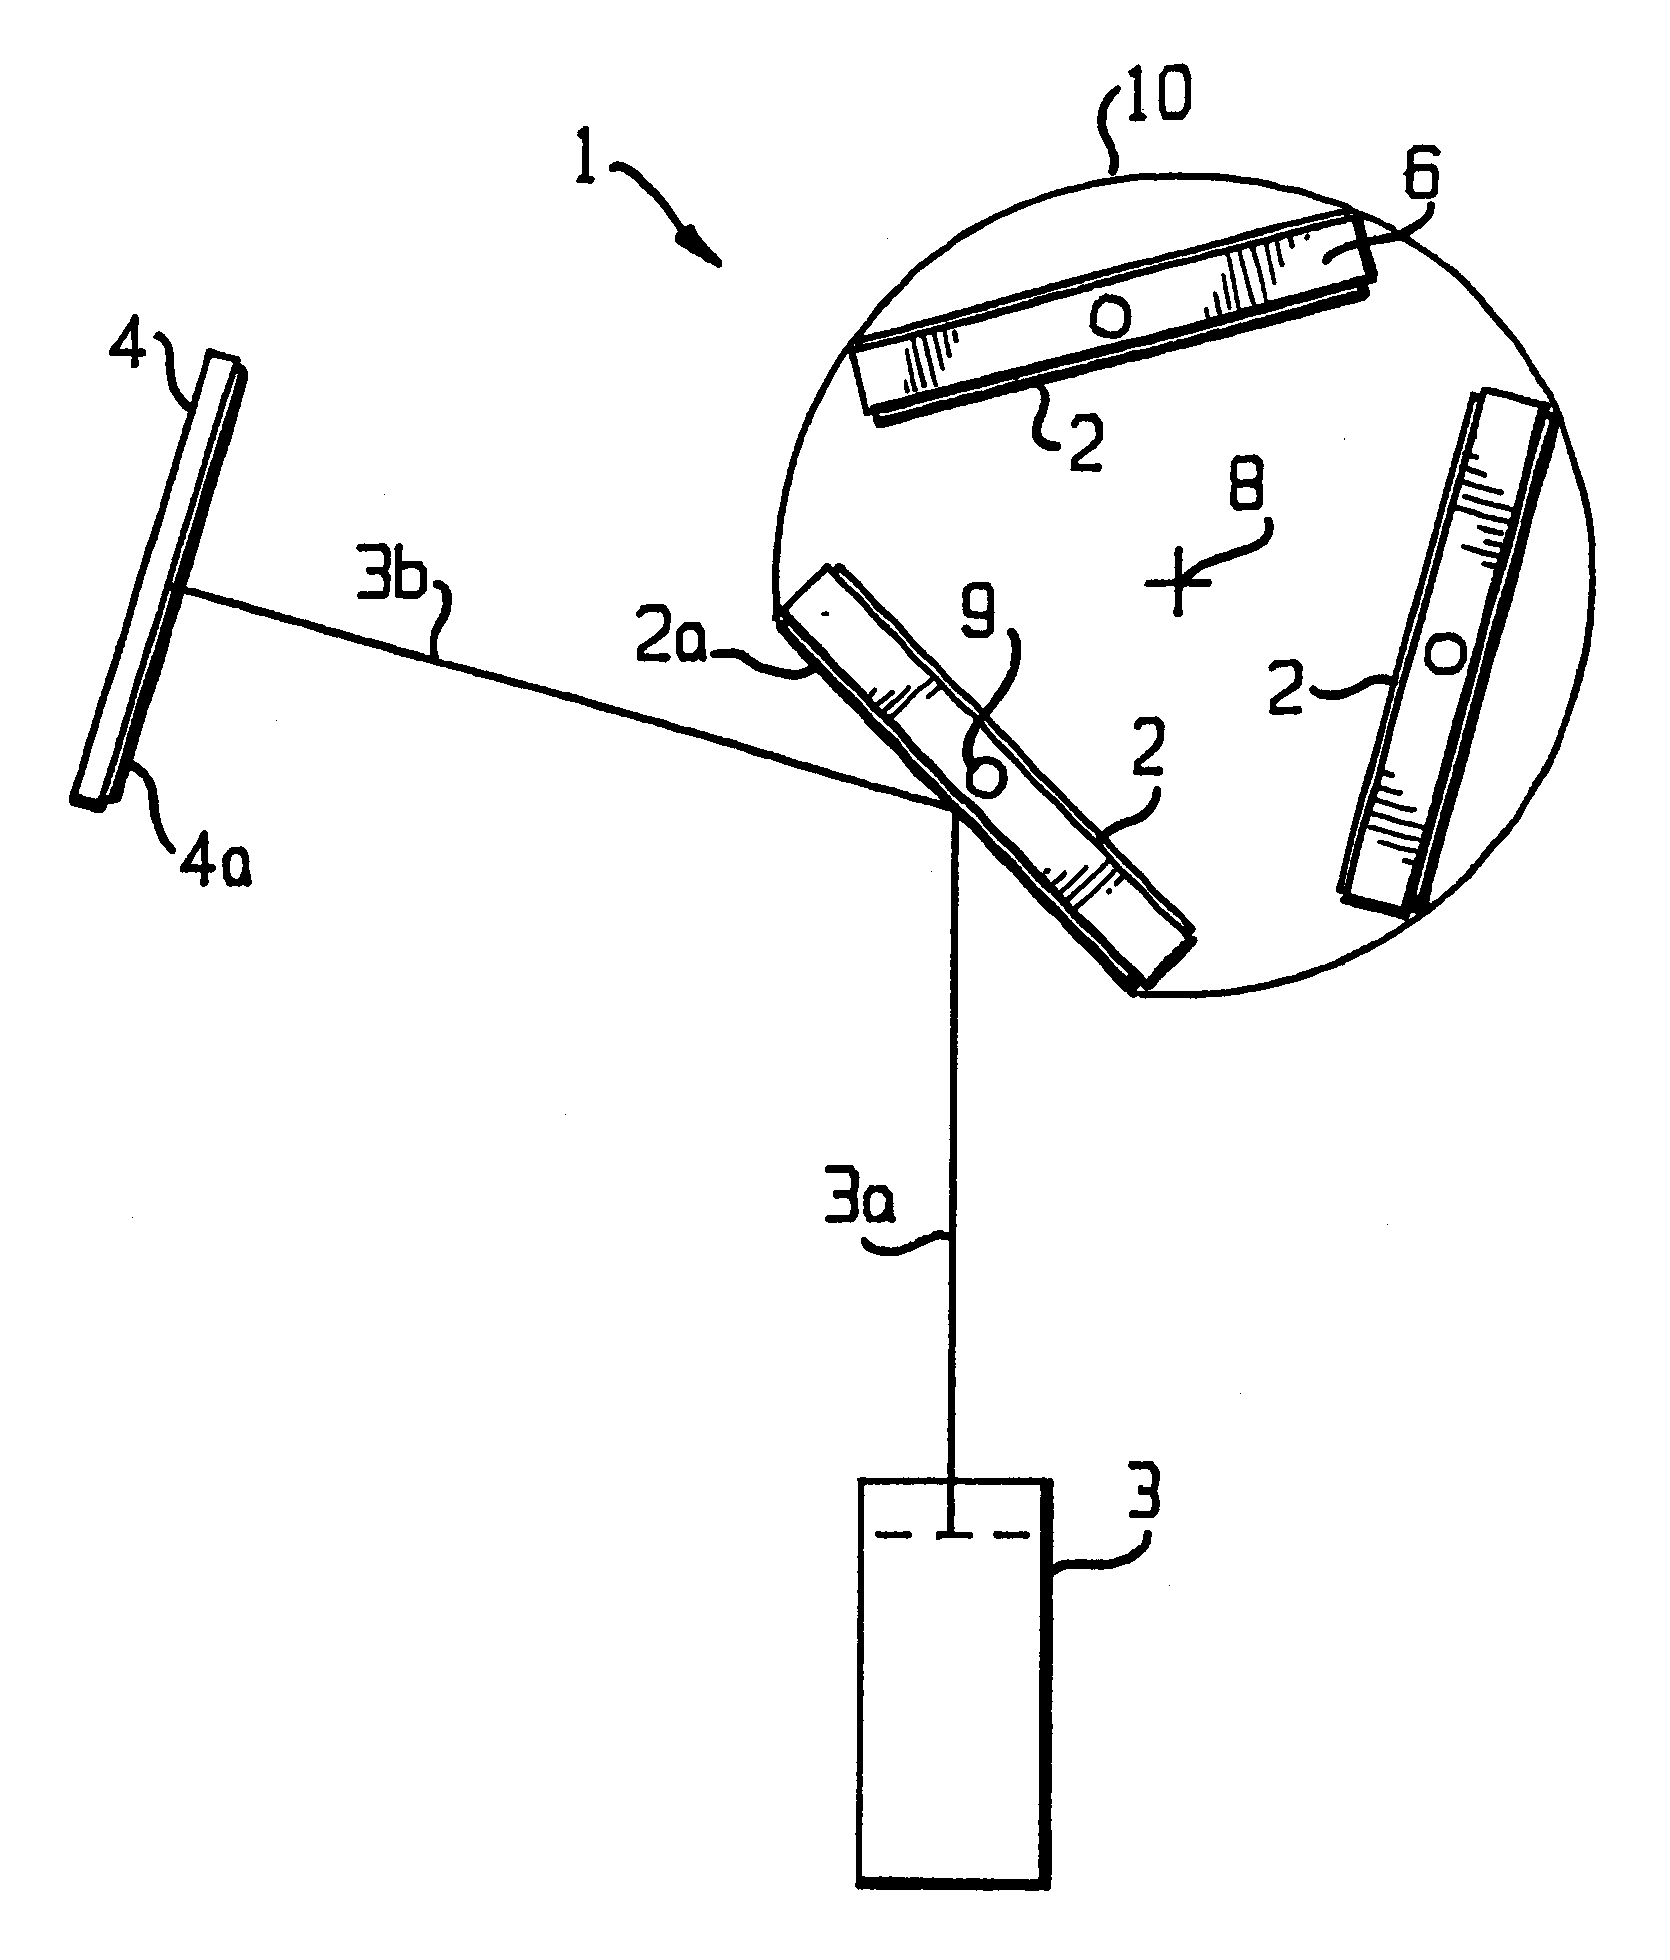 Target assembly for ion beam sputter deposition with multiple paddles each having targets on both sides